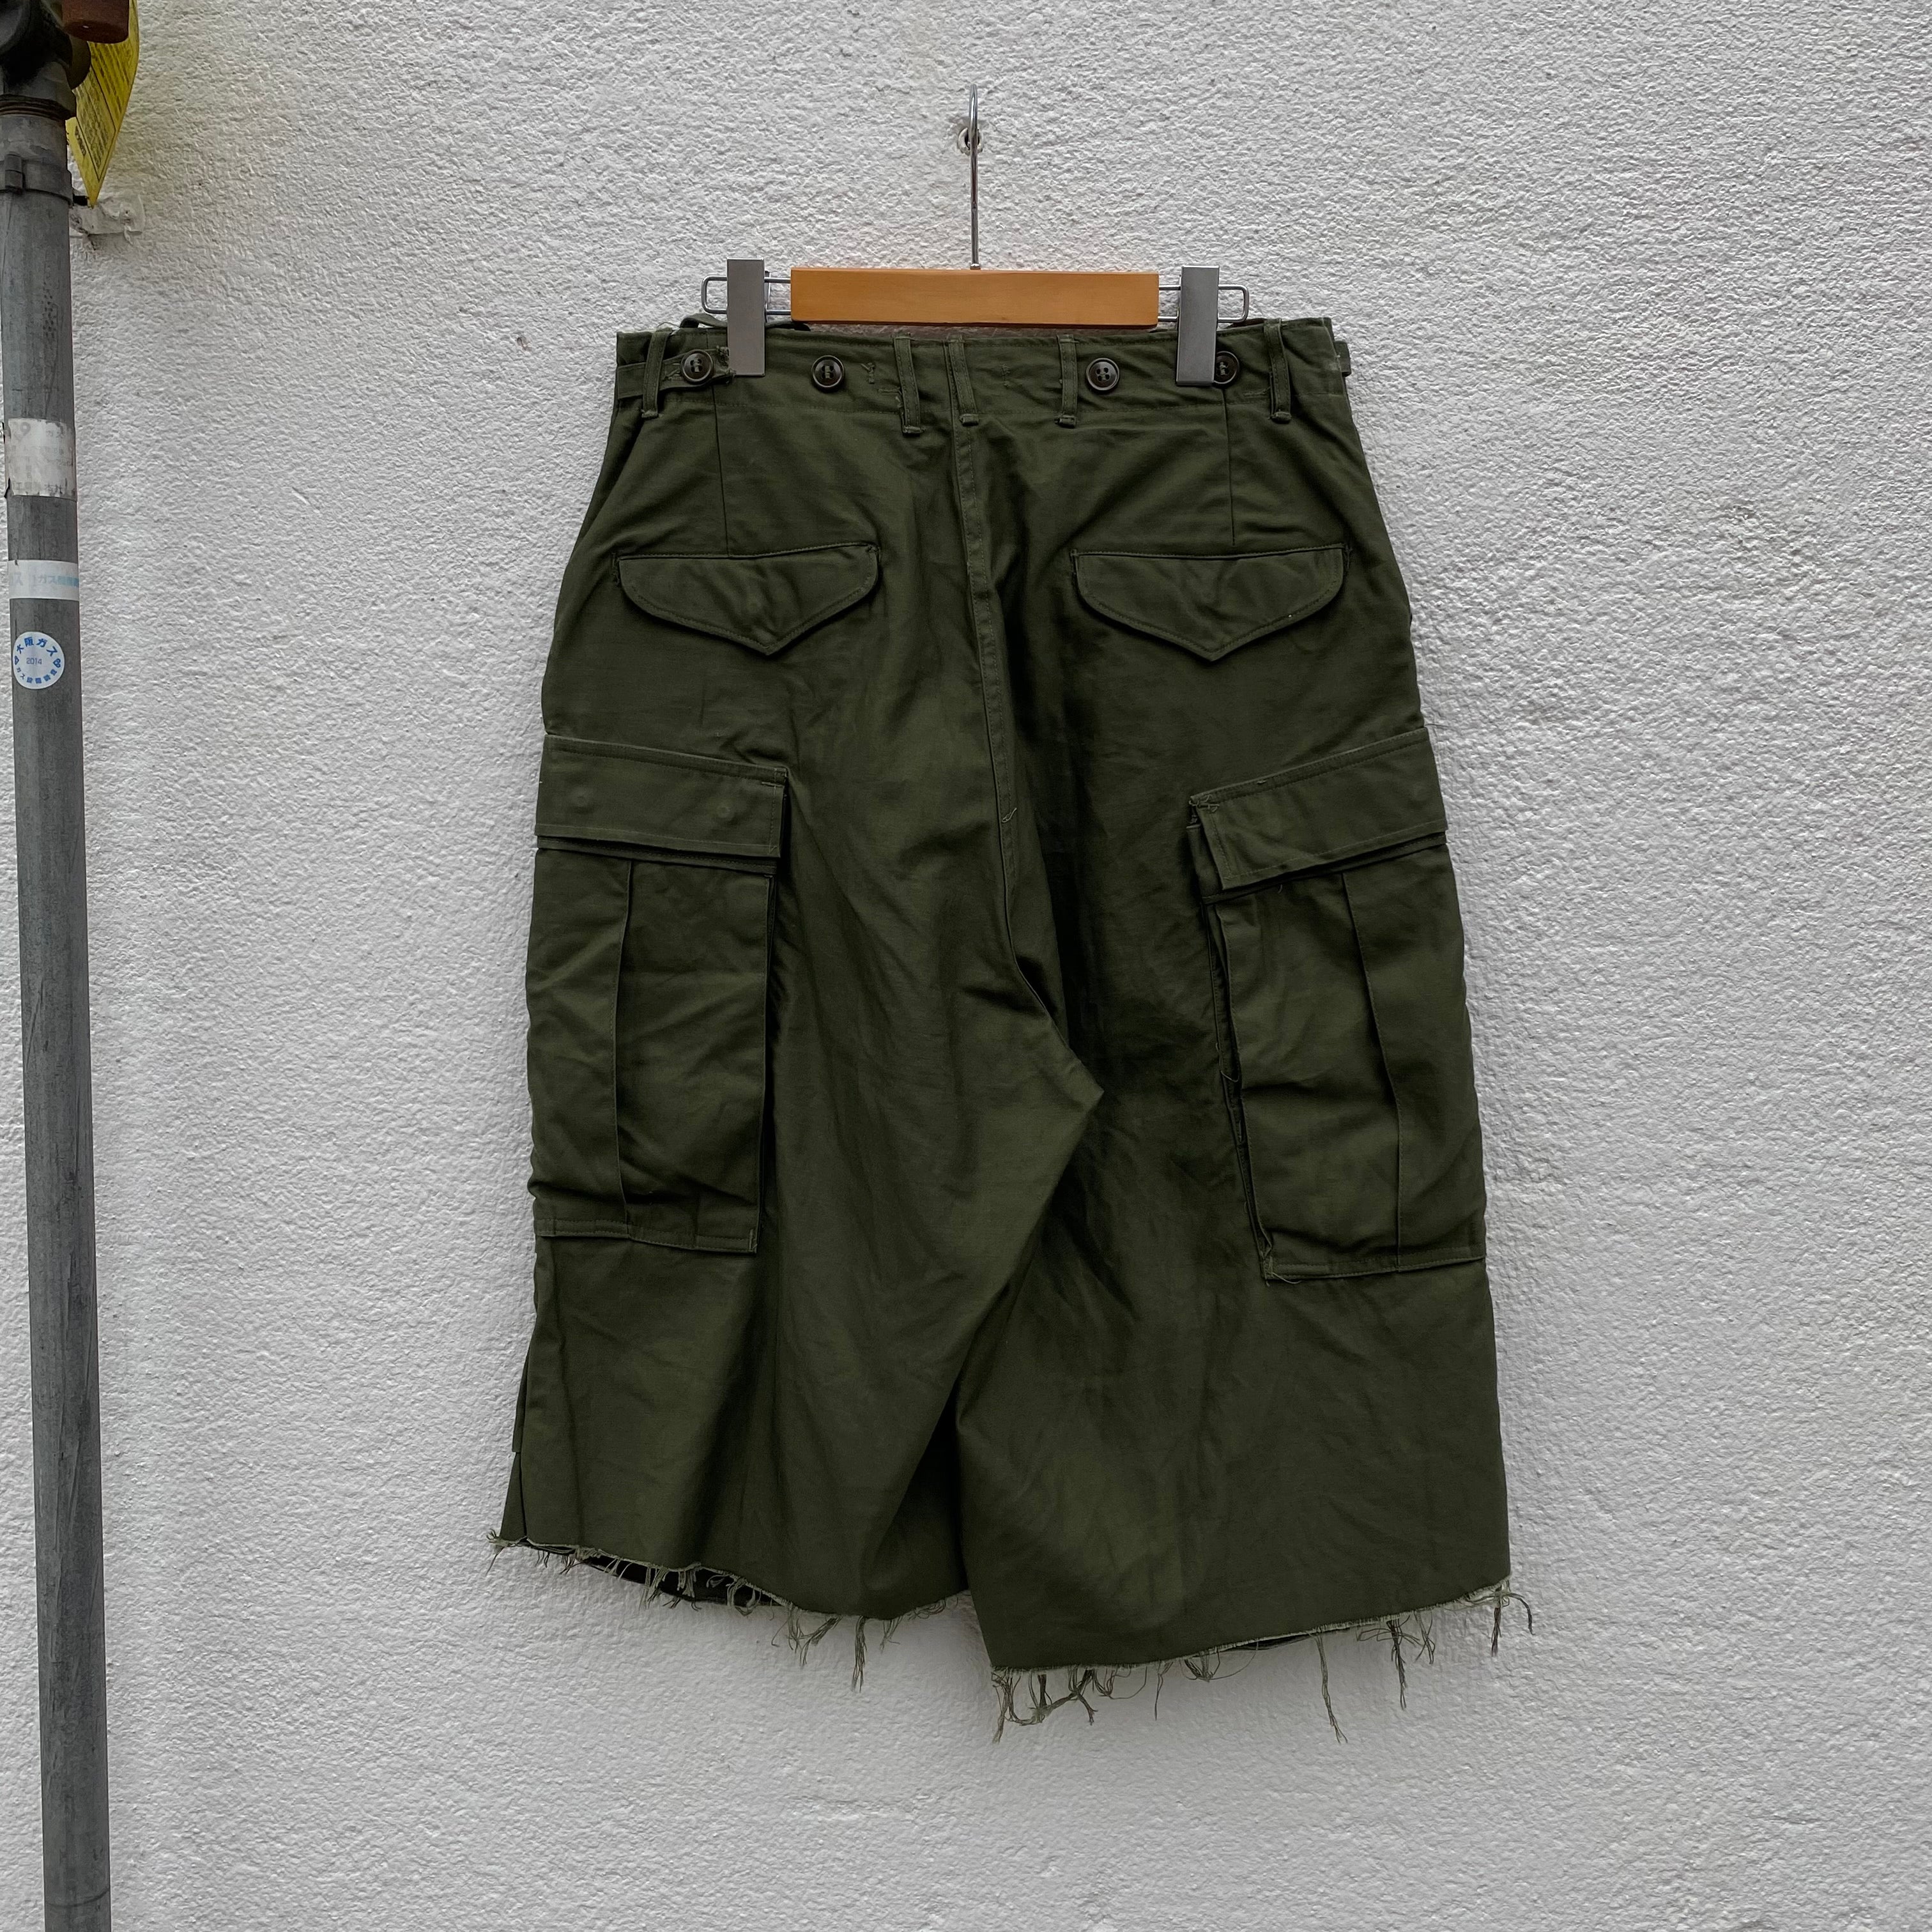 [ ONLY ONE ! ] CUT OFF M-51 FIELD TROUSERS / Mr.Clean Select